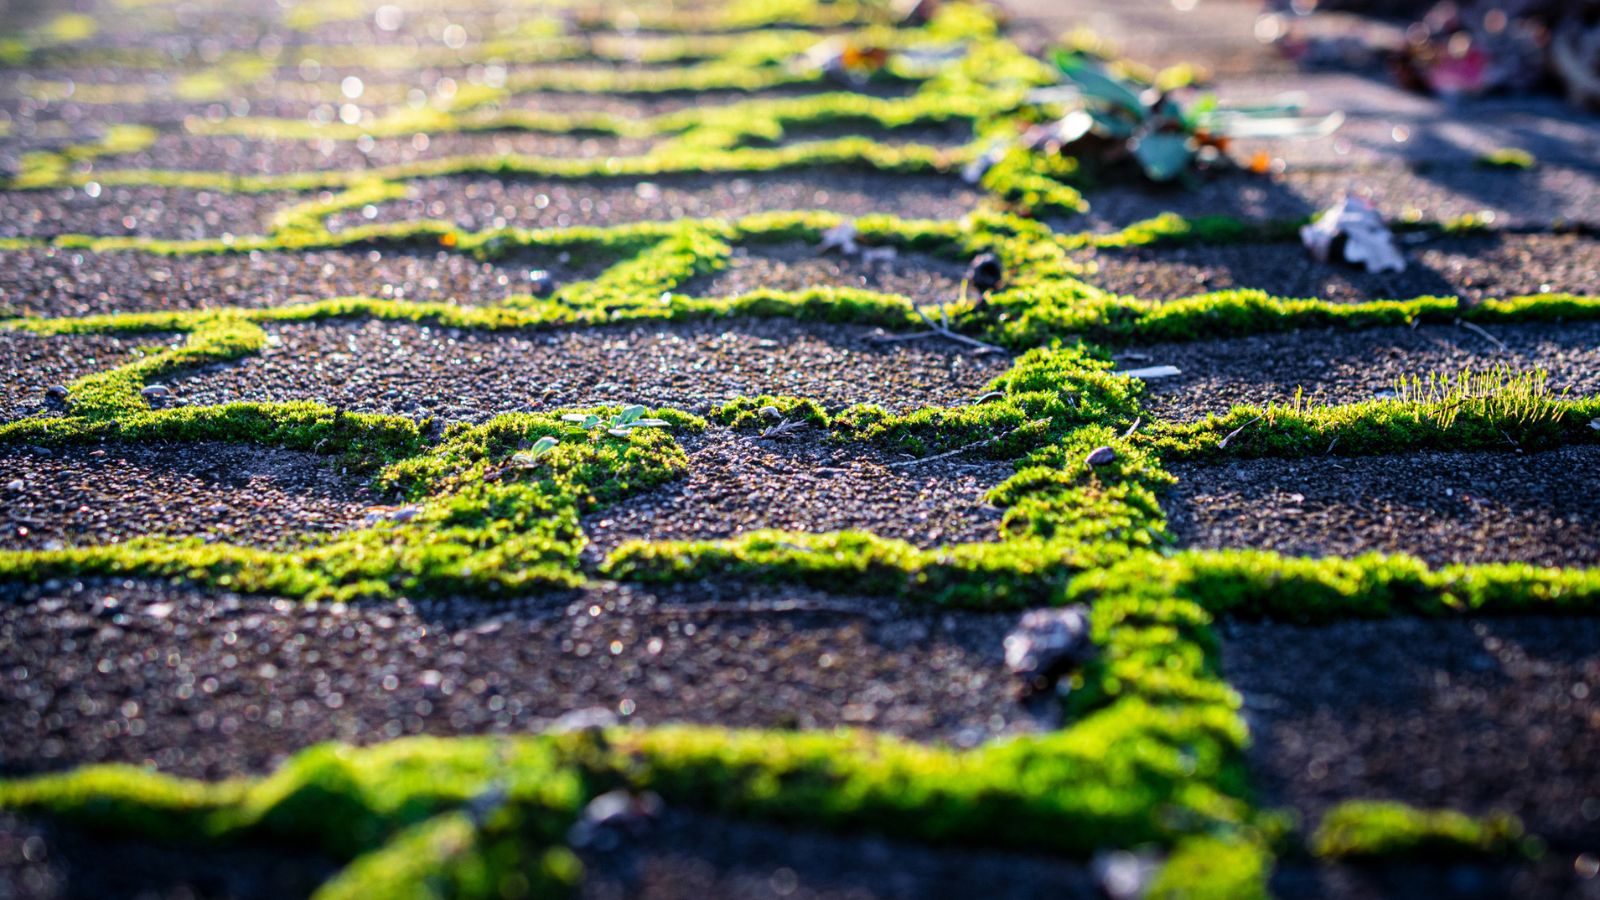 Get Rid Of Moss From Paving